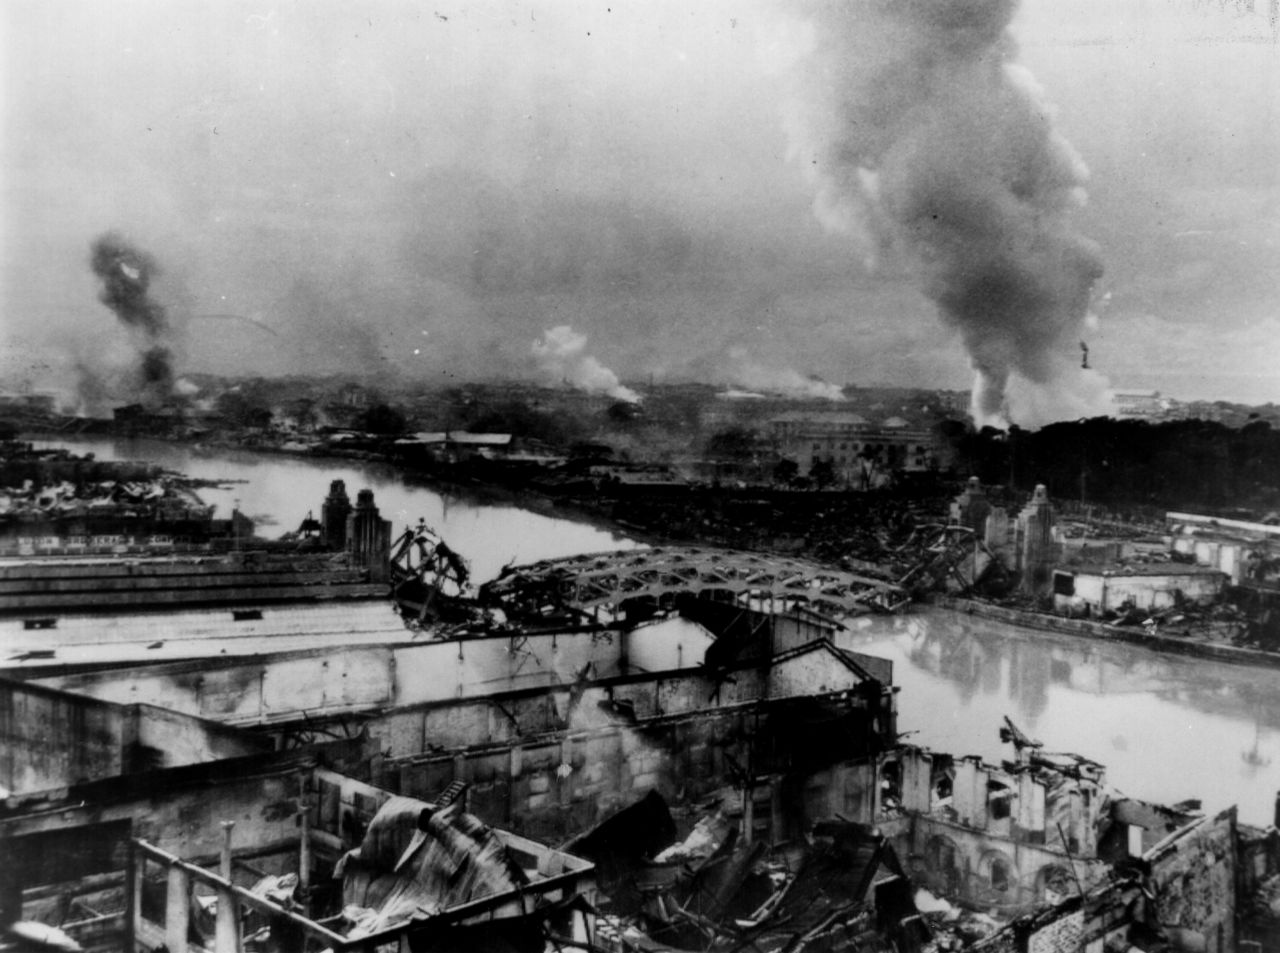 The European Jews escaped the throes of the Nazis only to face another bloody war under Japanese occupation. Manila burned following the bombing by the Japanese forces on February 27, 1945. The battle for Manila was one of the bloodiest on the Pacific front. 